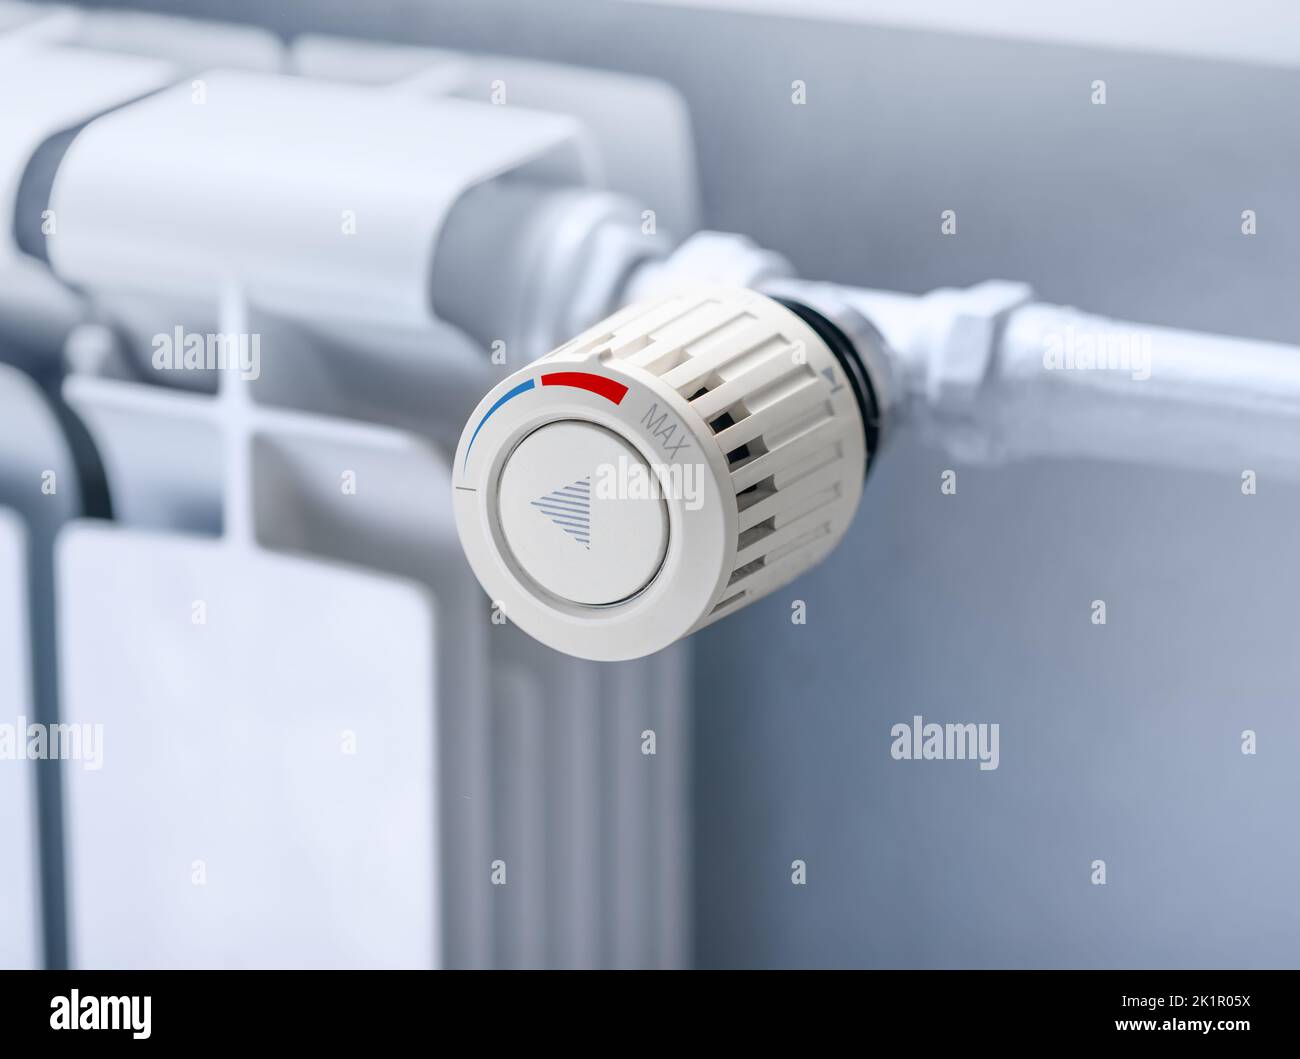 Heating radiator Thermostat set to low temperature, symbol for saving money at heating costs. Energy crisis, energy efficiency and rising heating cost Stock Photo